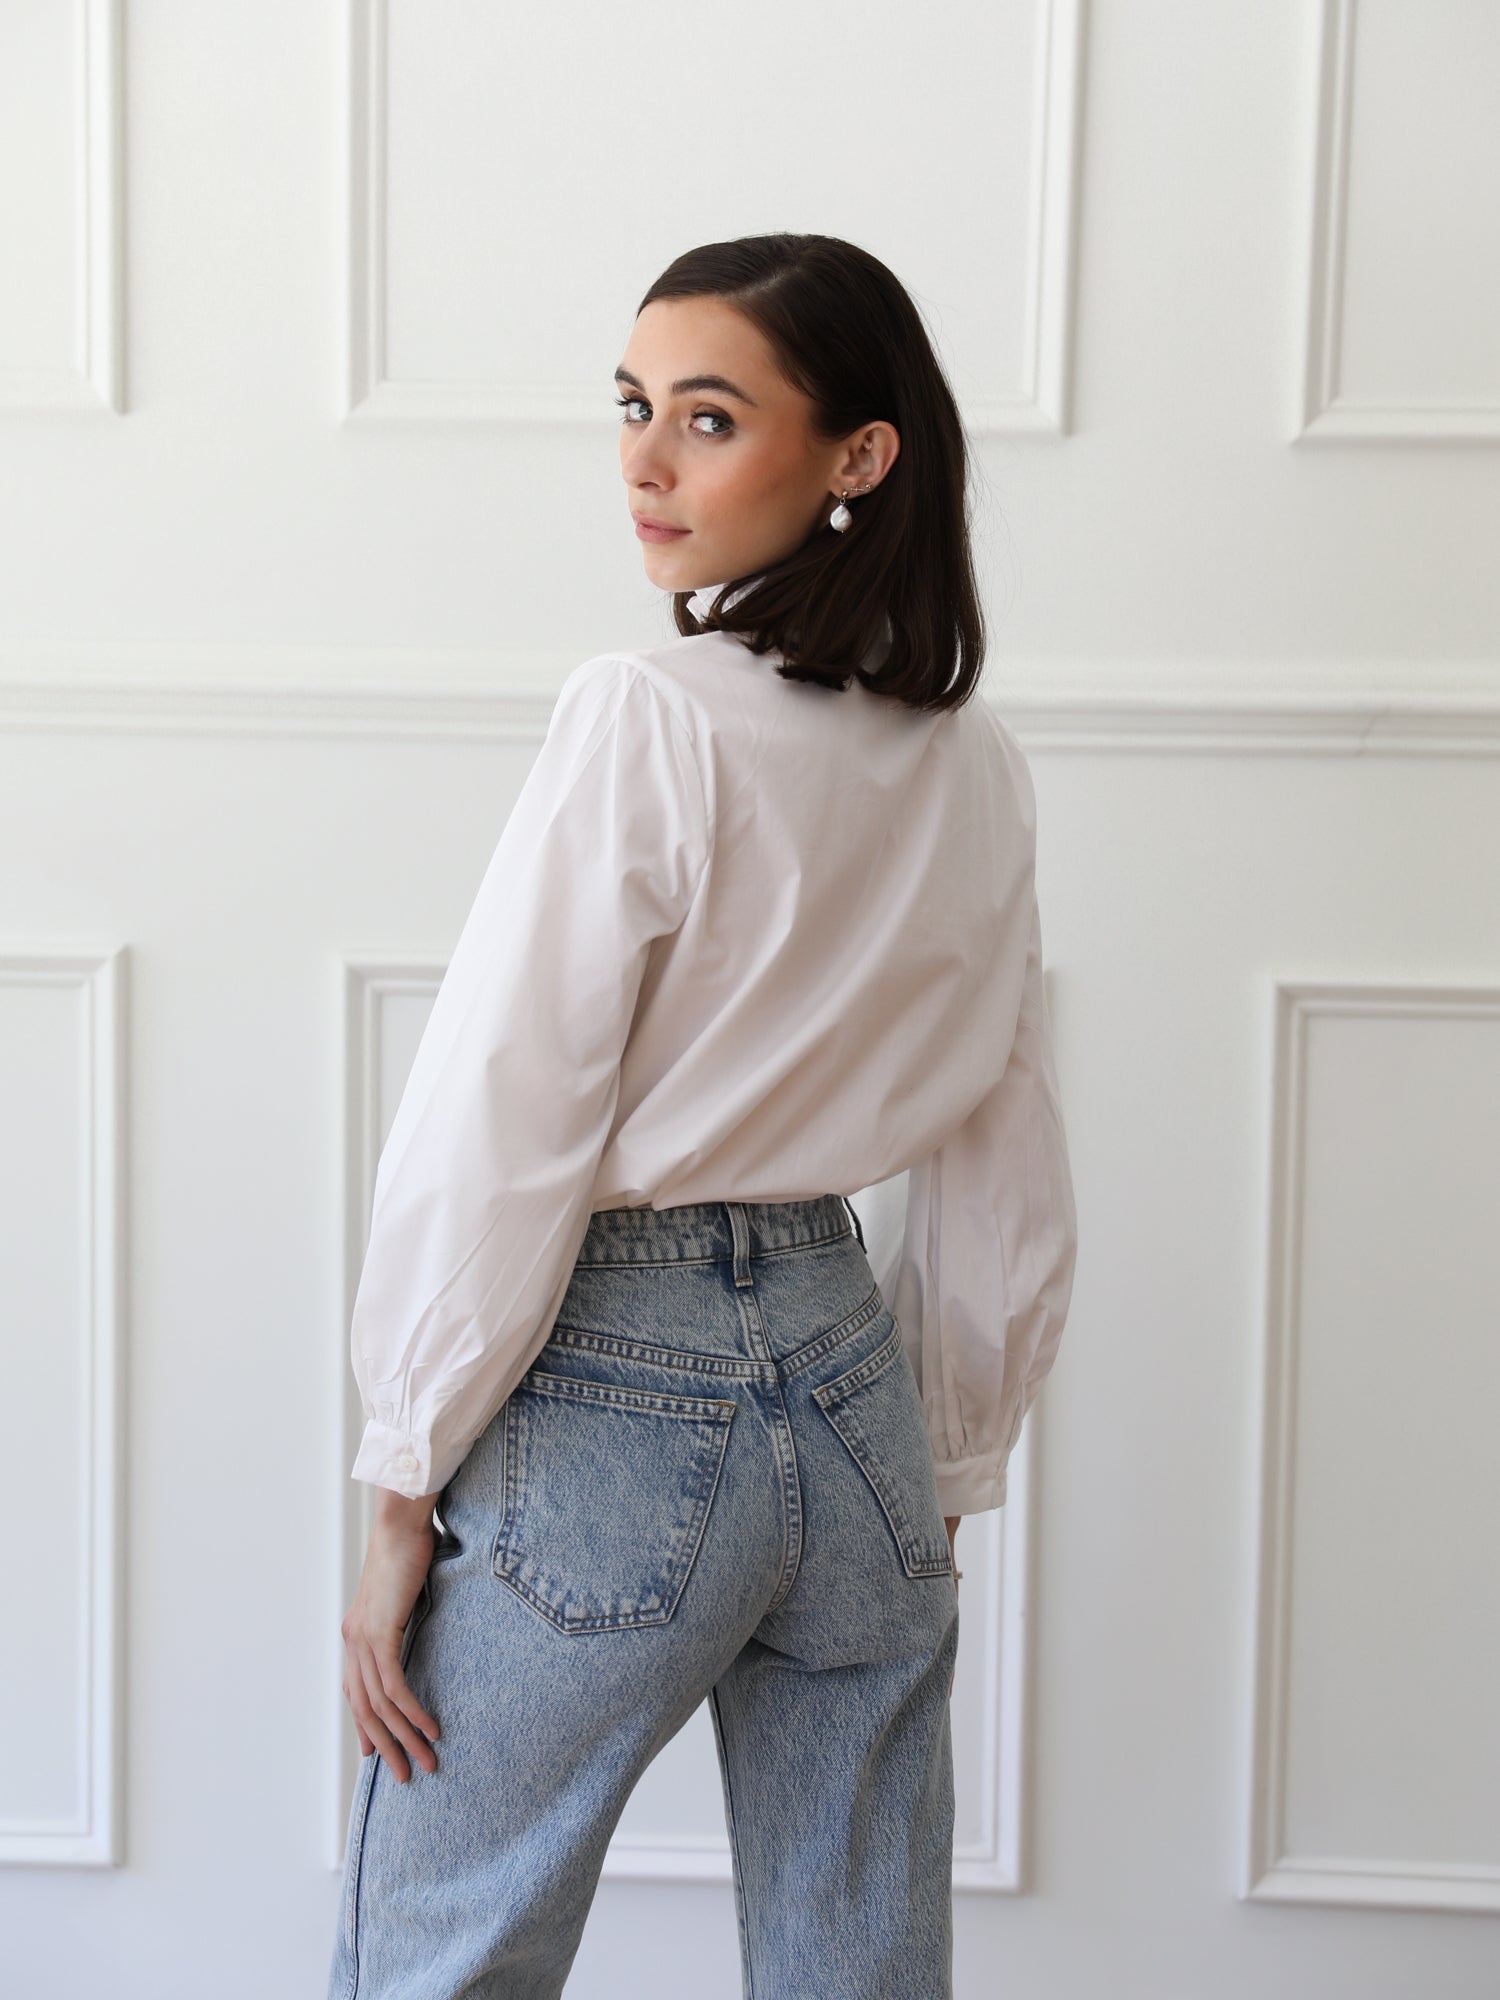 MILLE Clothing Blair Top in White